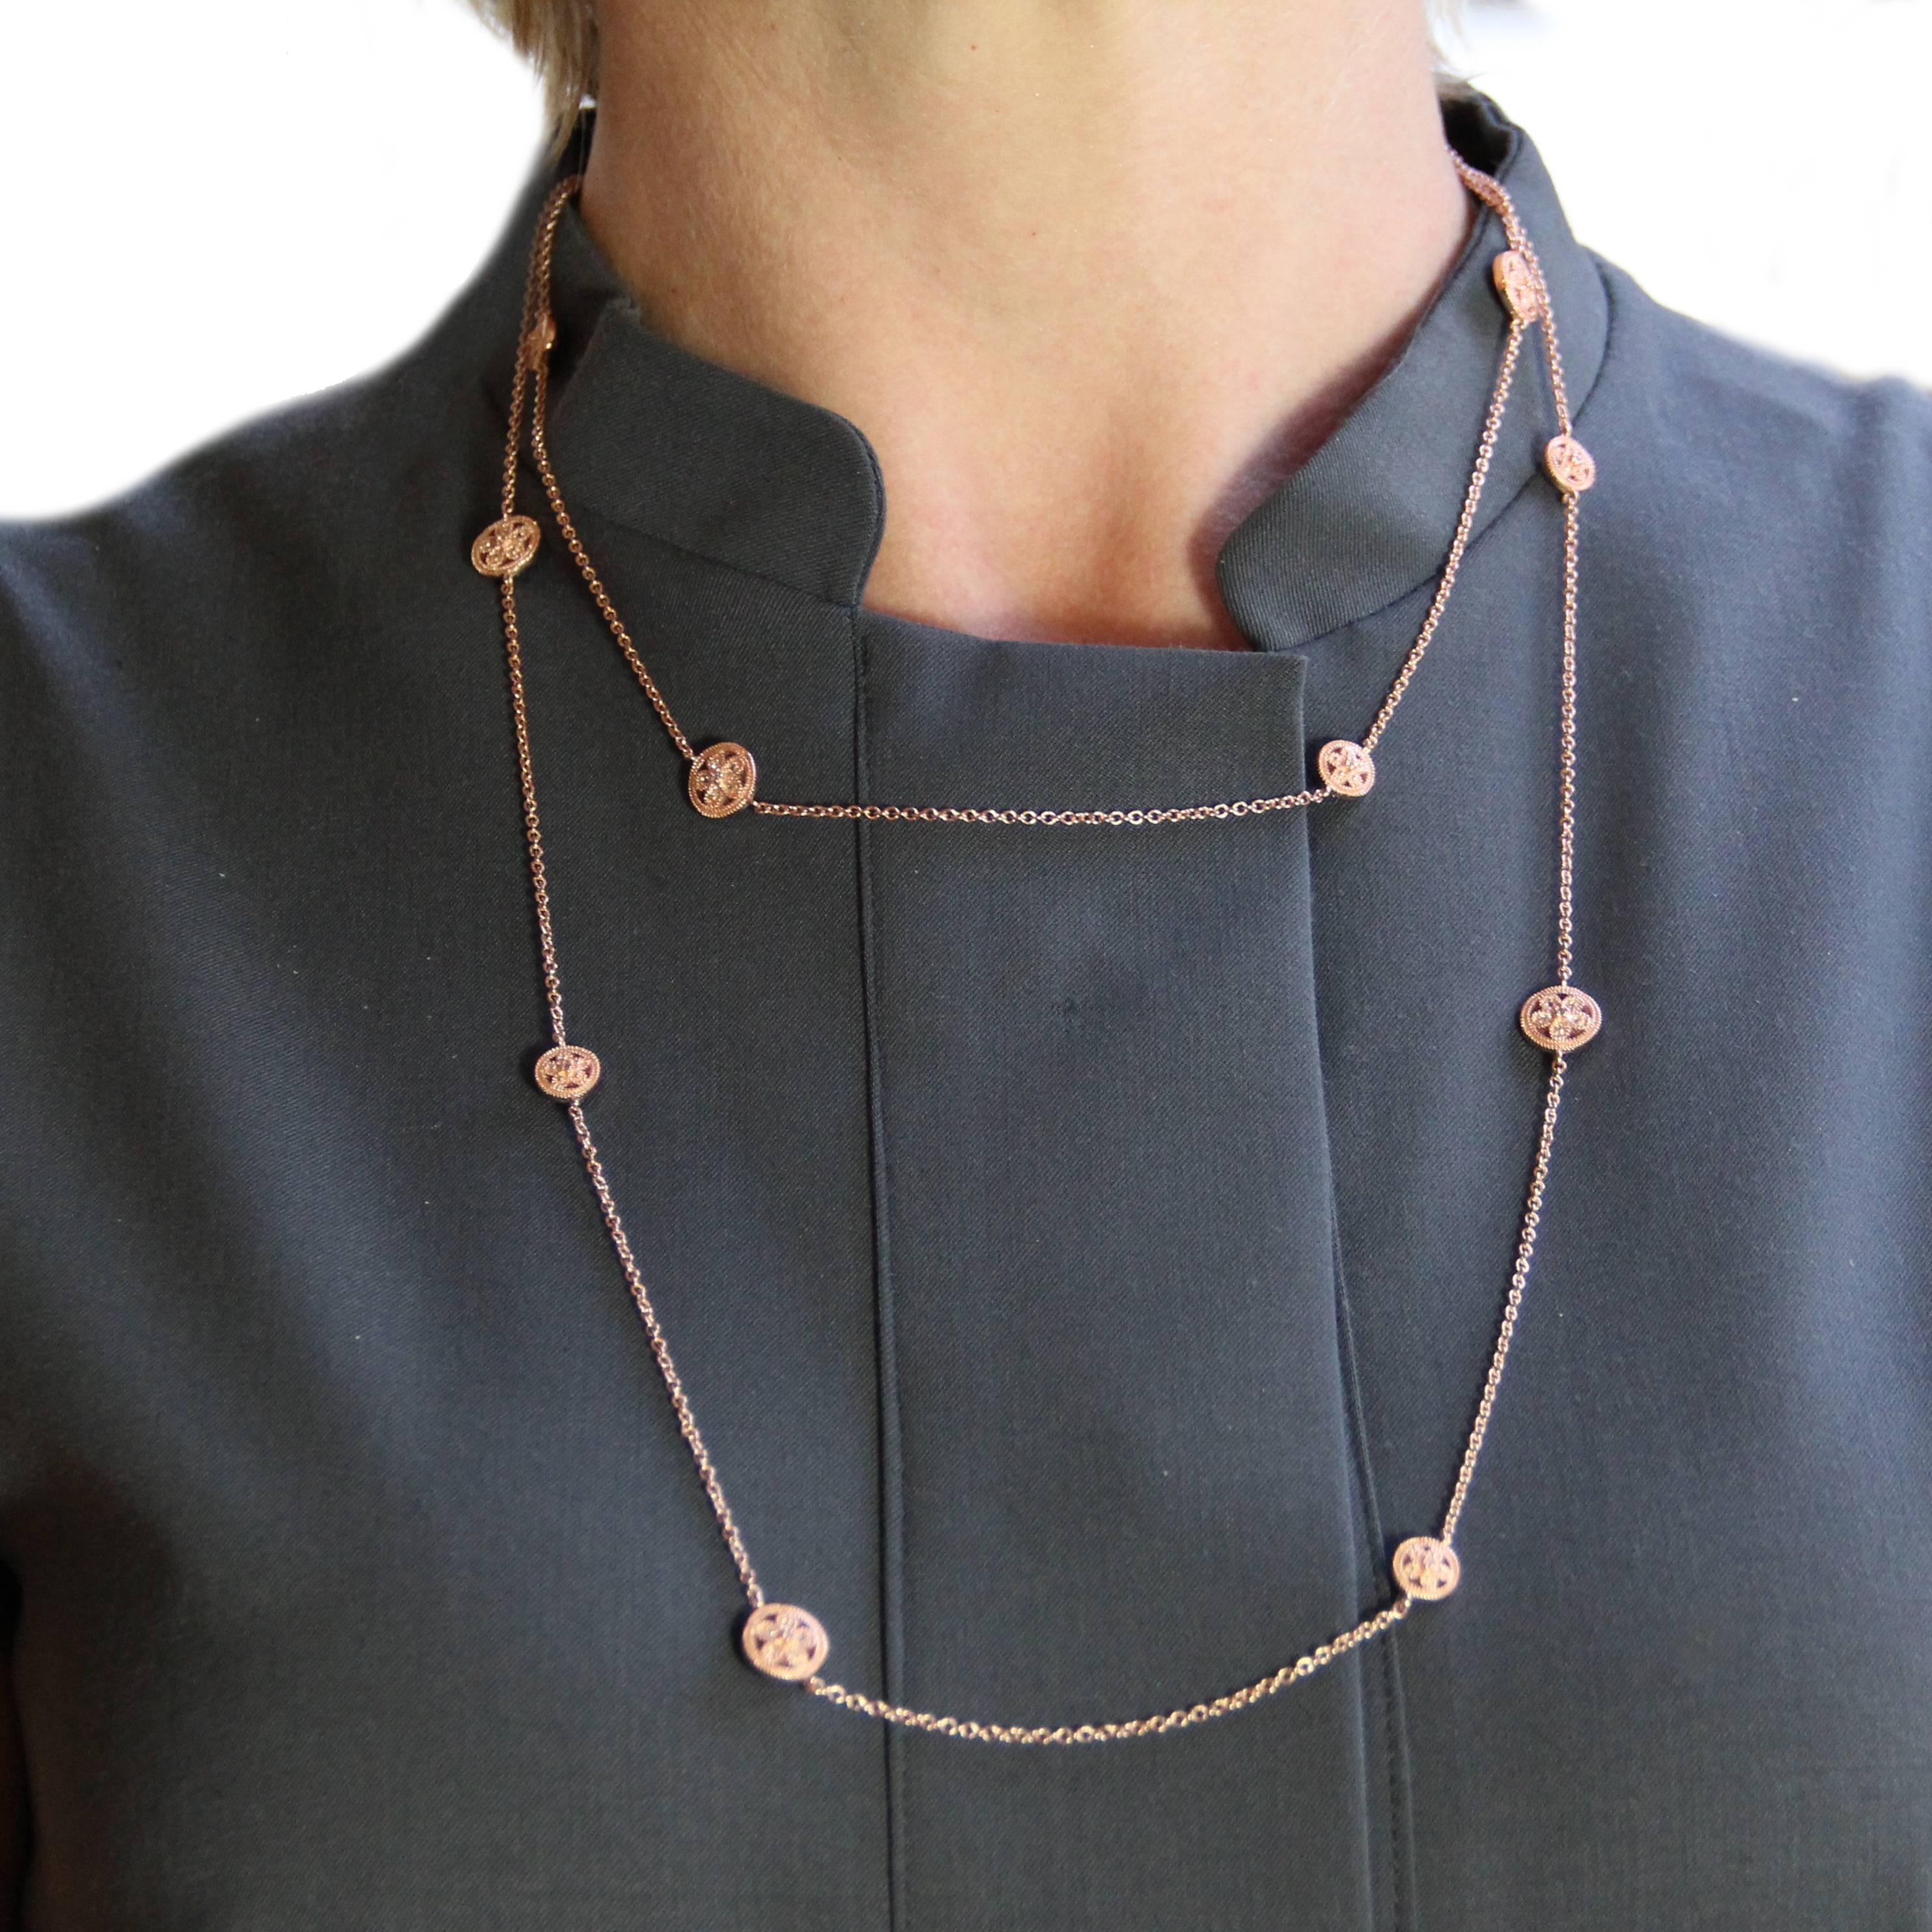 Necklace in vermeil, rose gold and silver.
This splendid rose gold chain is made of a jaseron mesh punctuated with rounded motifs chiseled, perforated and set with small white crystals. A cameo on shell representing a flower is also present bringing